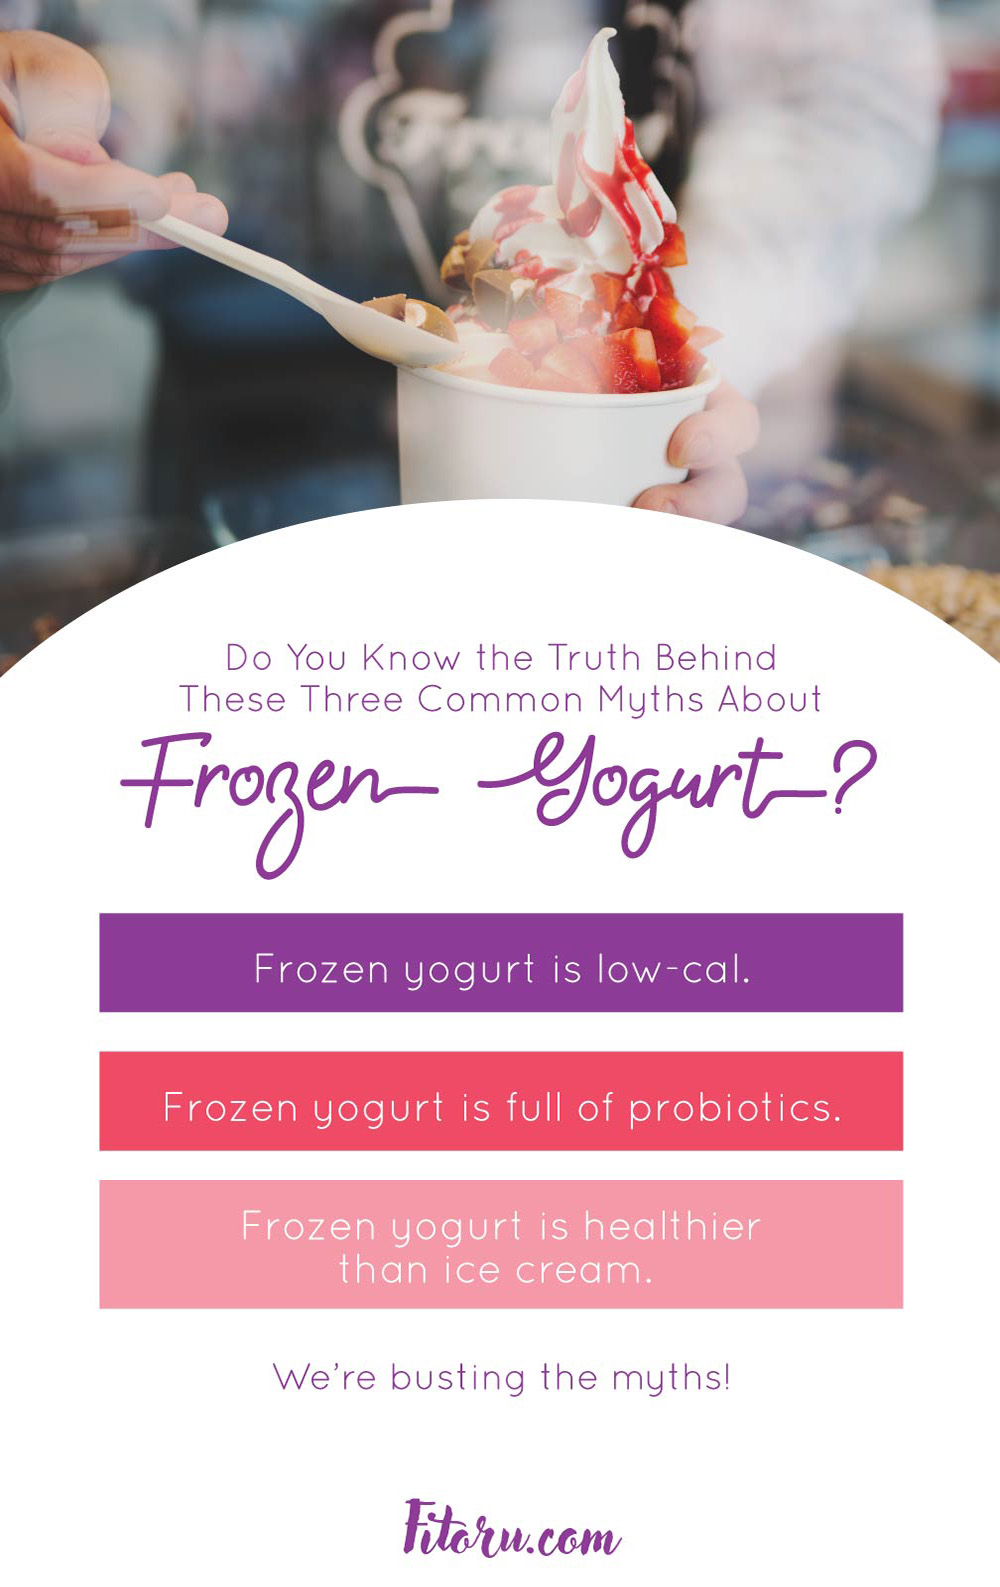 Do You Know the Truth Behind These Three Common Myths About Frozen Yogurt?